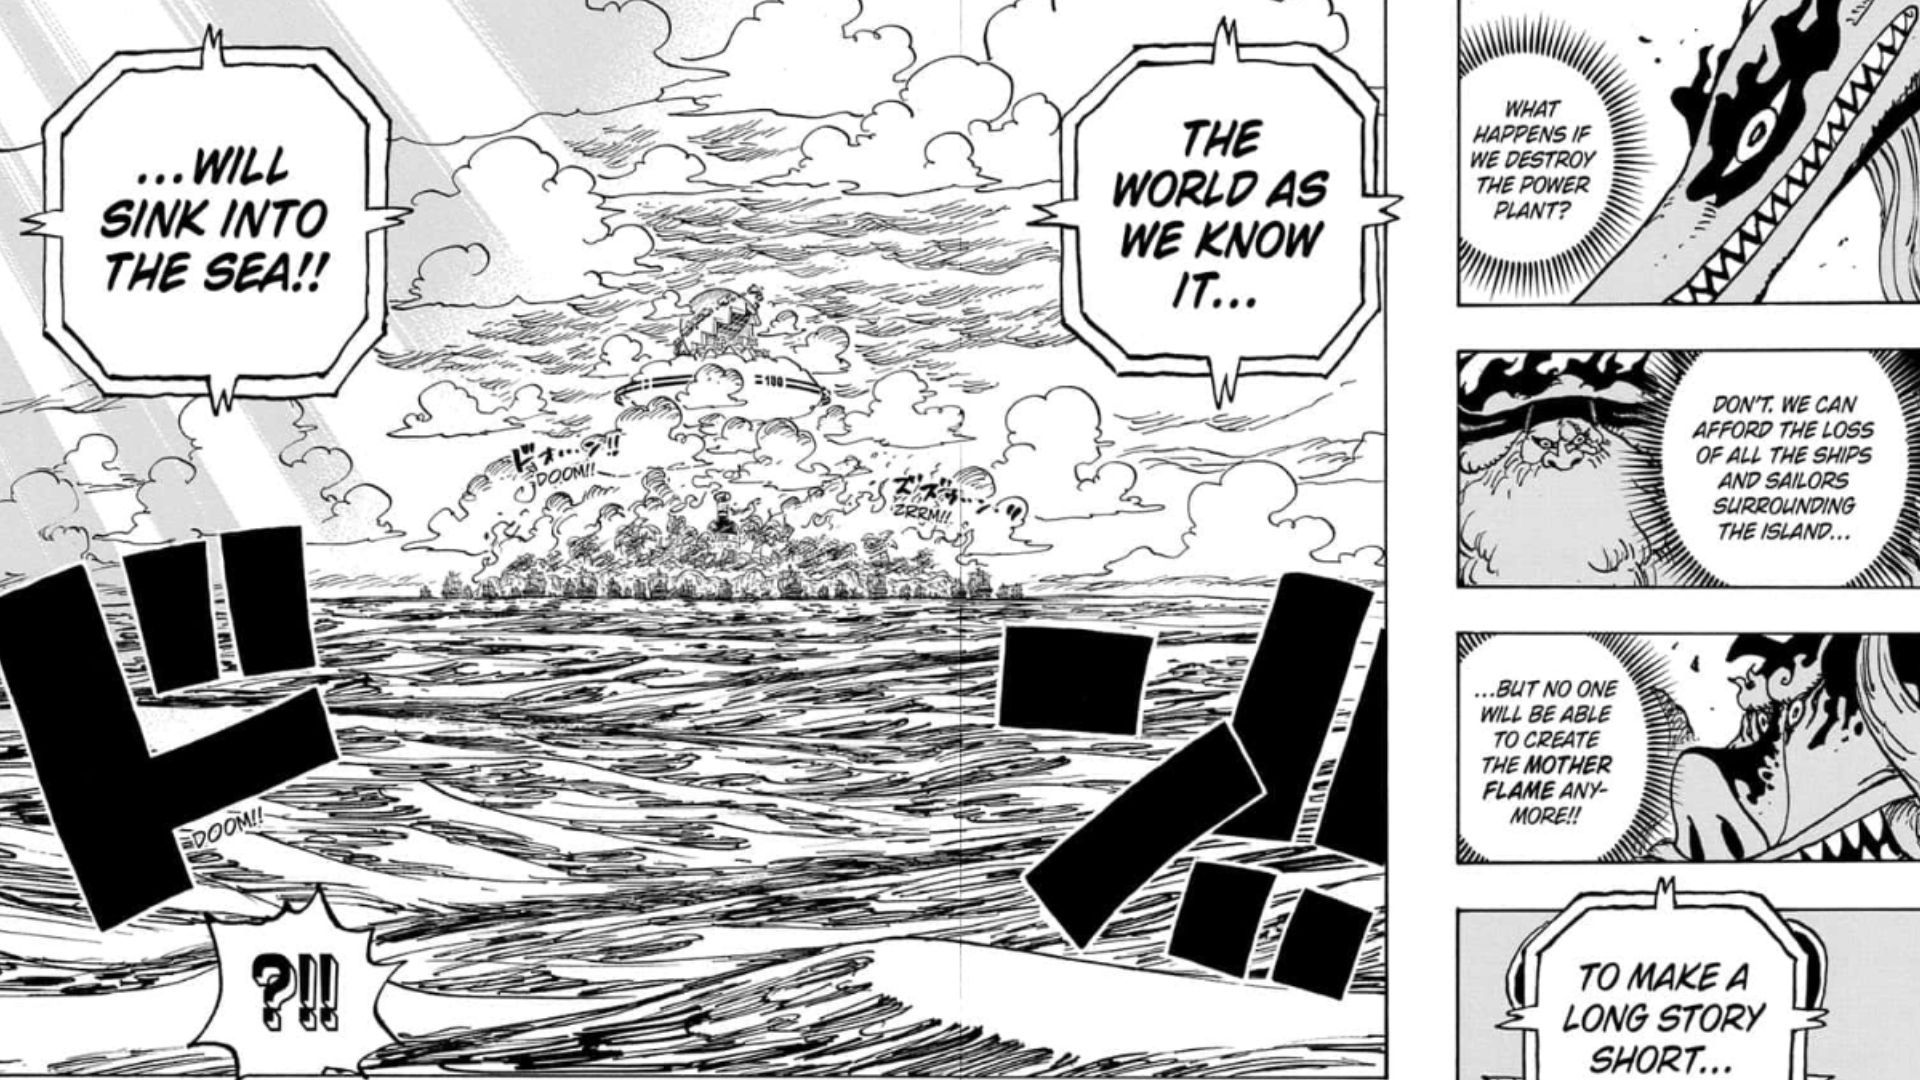 Screenshot of the double page from One Piece Chapter 1113 featuring Vegapunk's statement about the world sinking into ocean